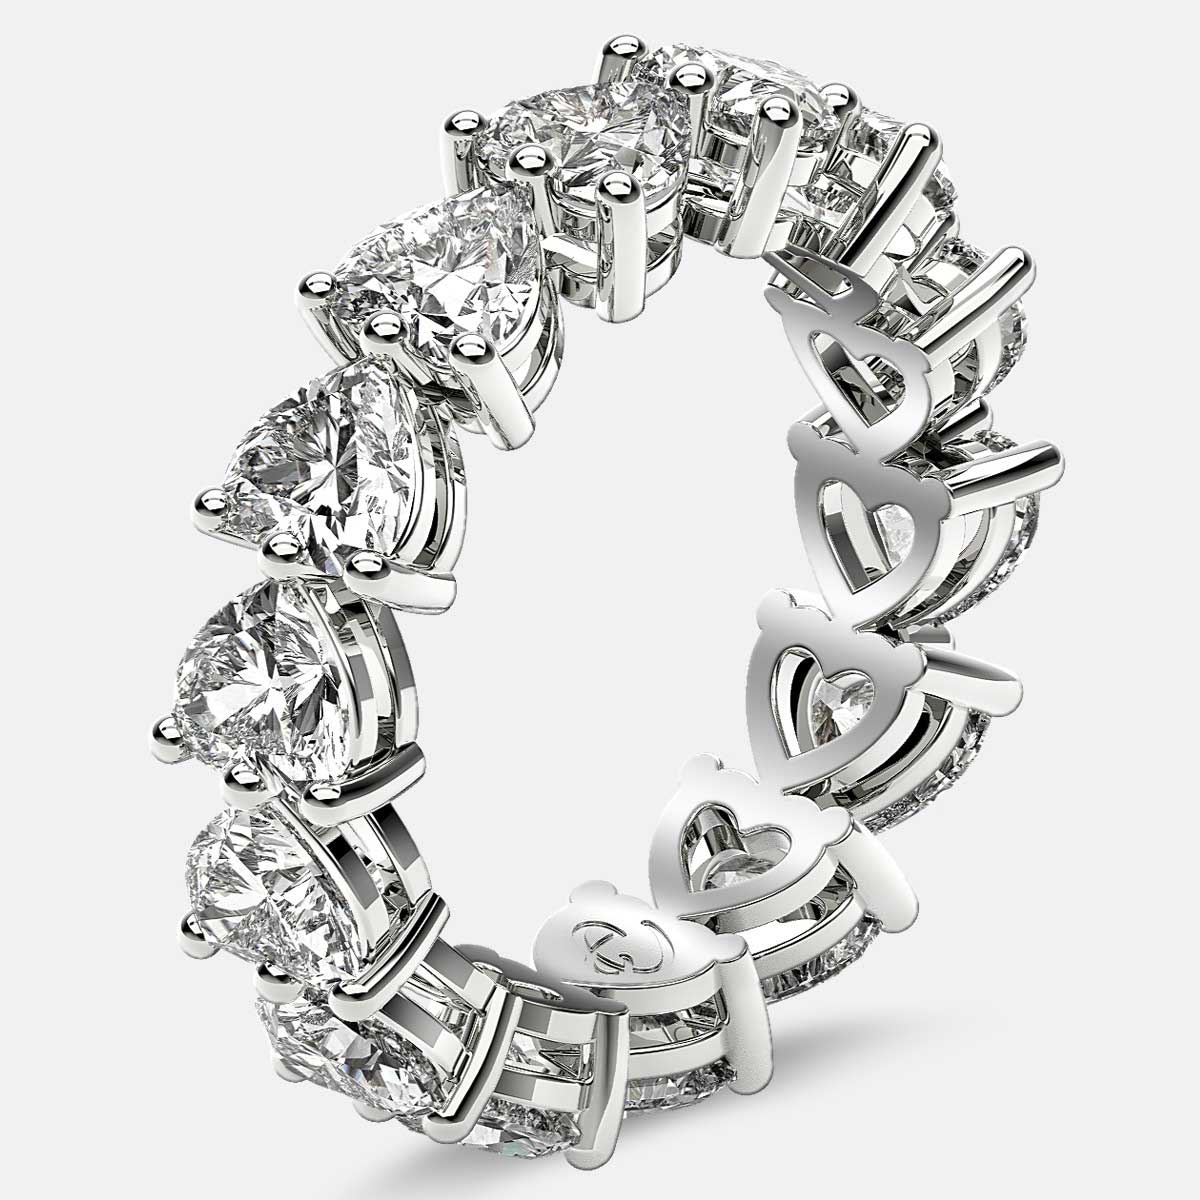 Eternity Ring with Prong Set Heart Shaped Diamonds in 18k White Gold